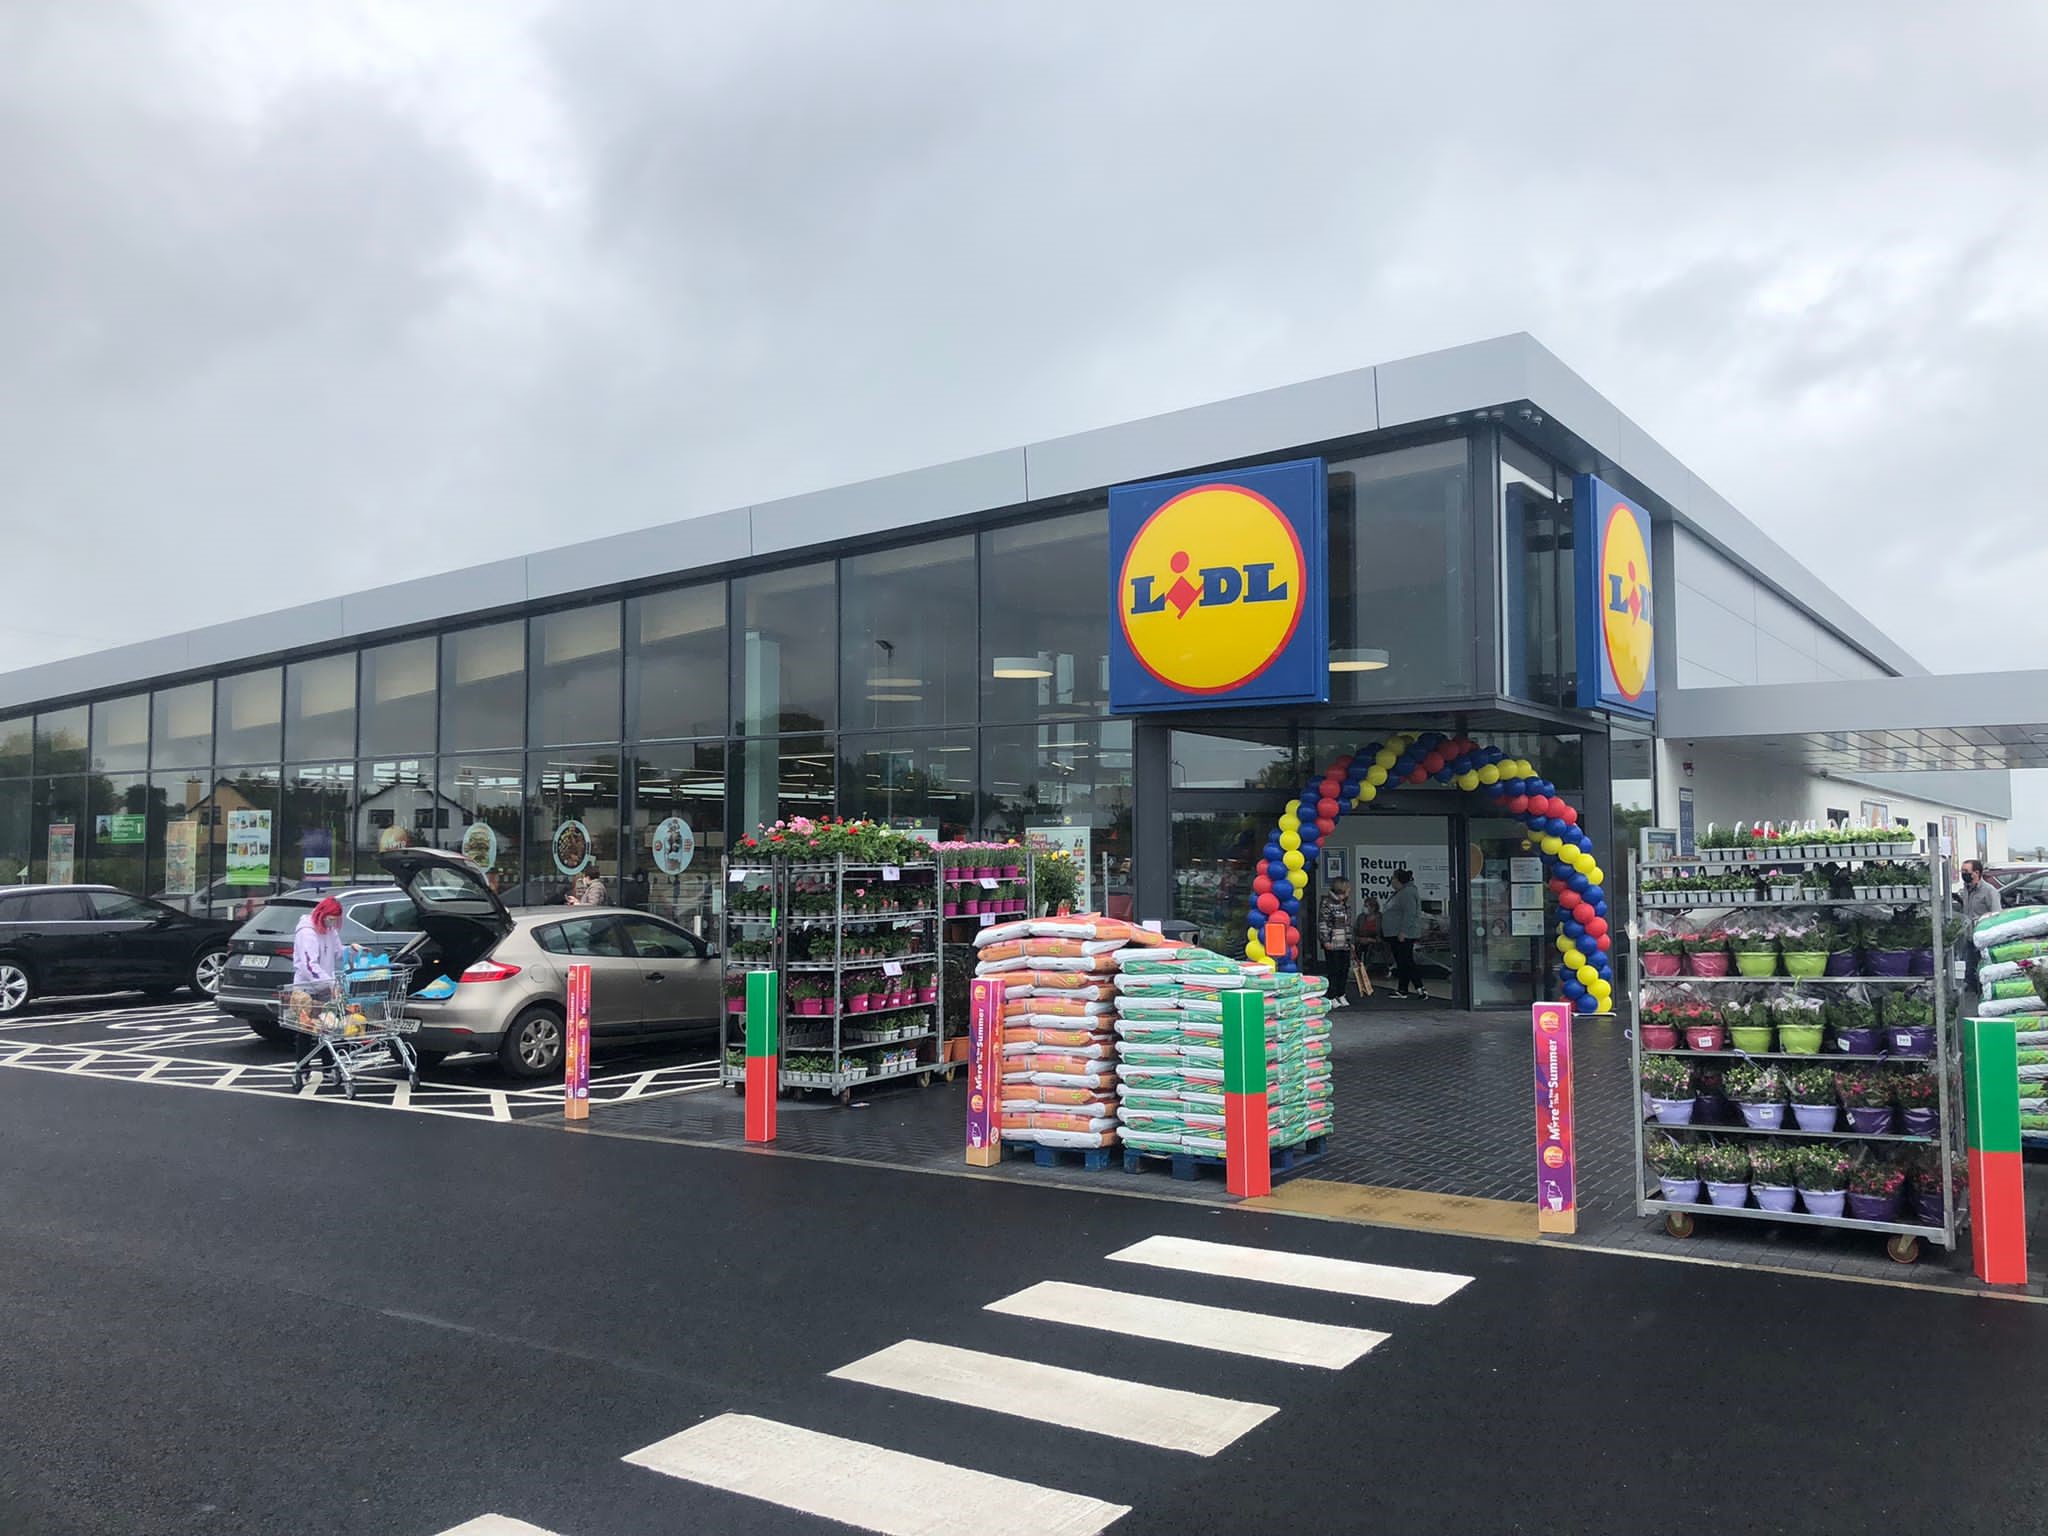 M&E Contract Completed for Lidl Claremorris